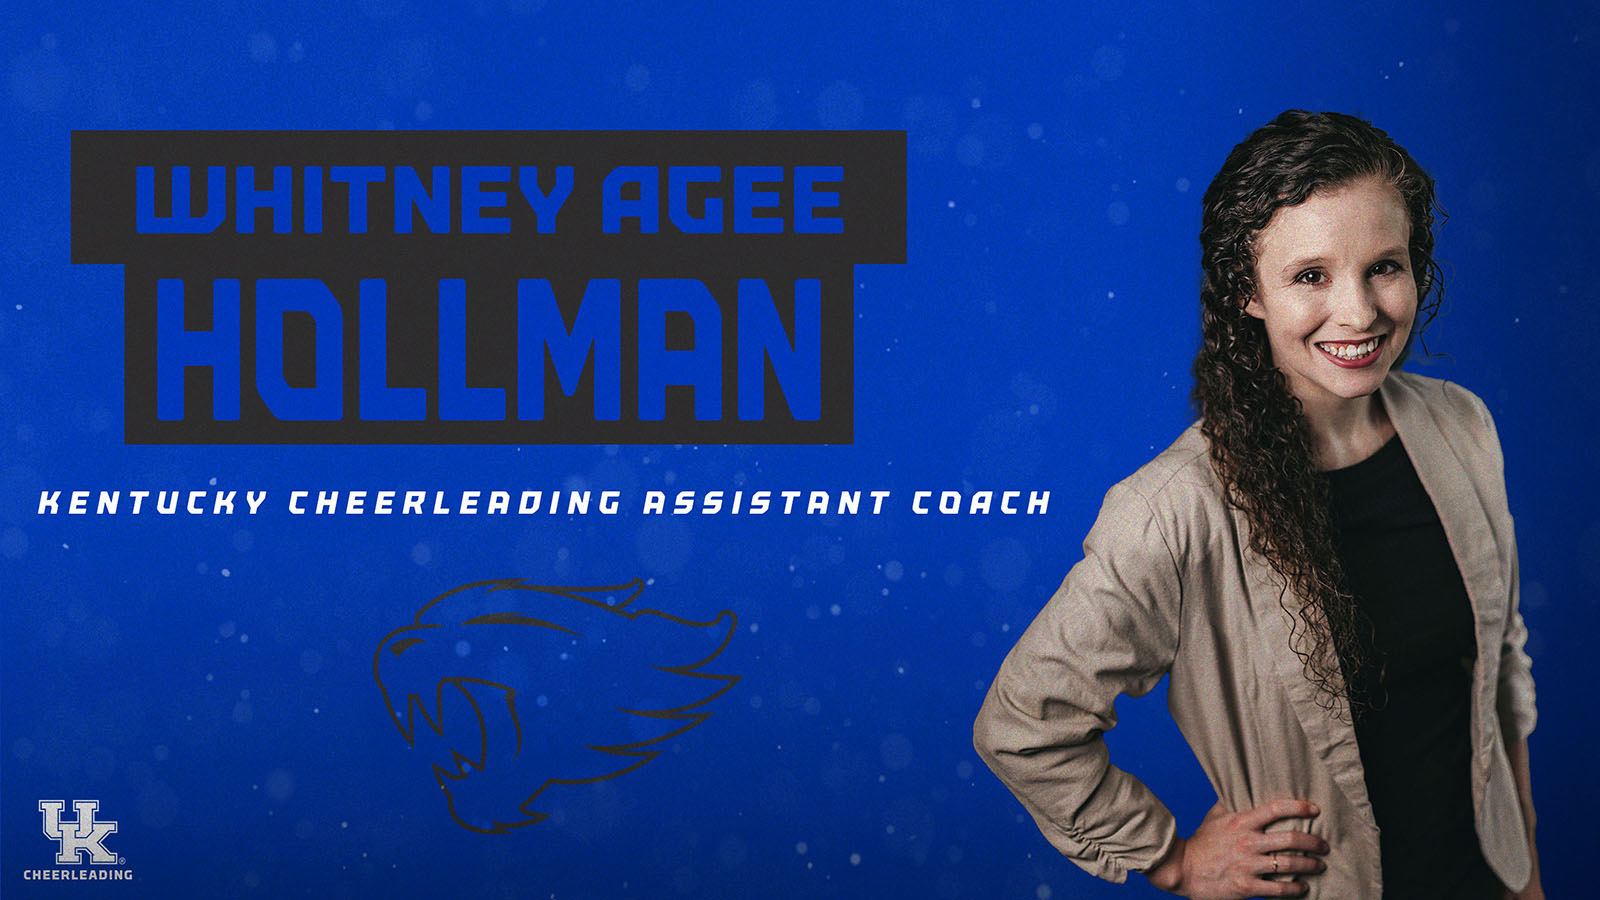 UK Cheerleading Announces Whitney Hollman as Assistant Coach